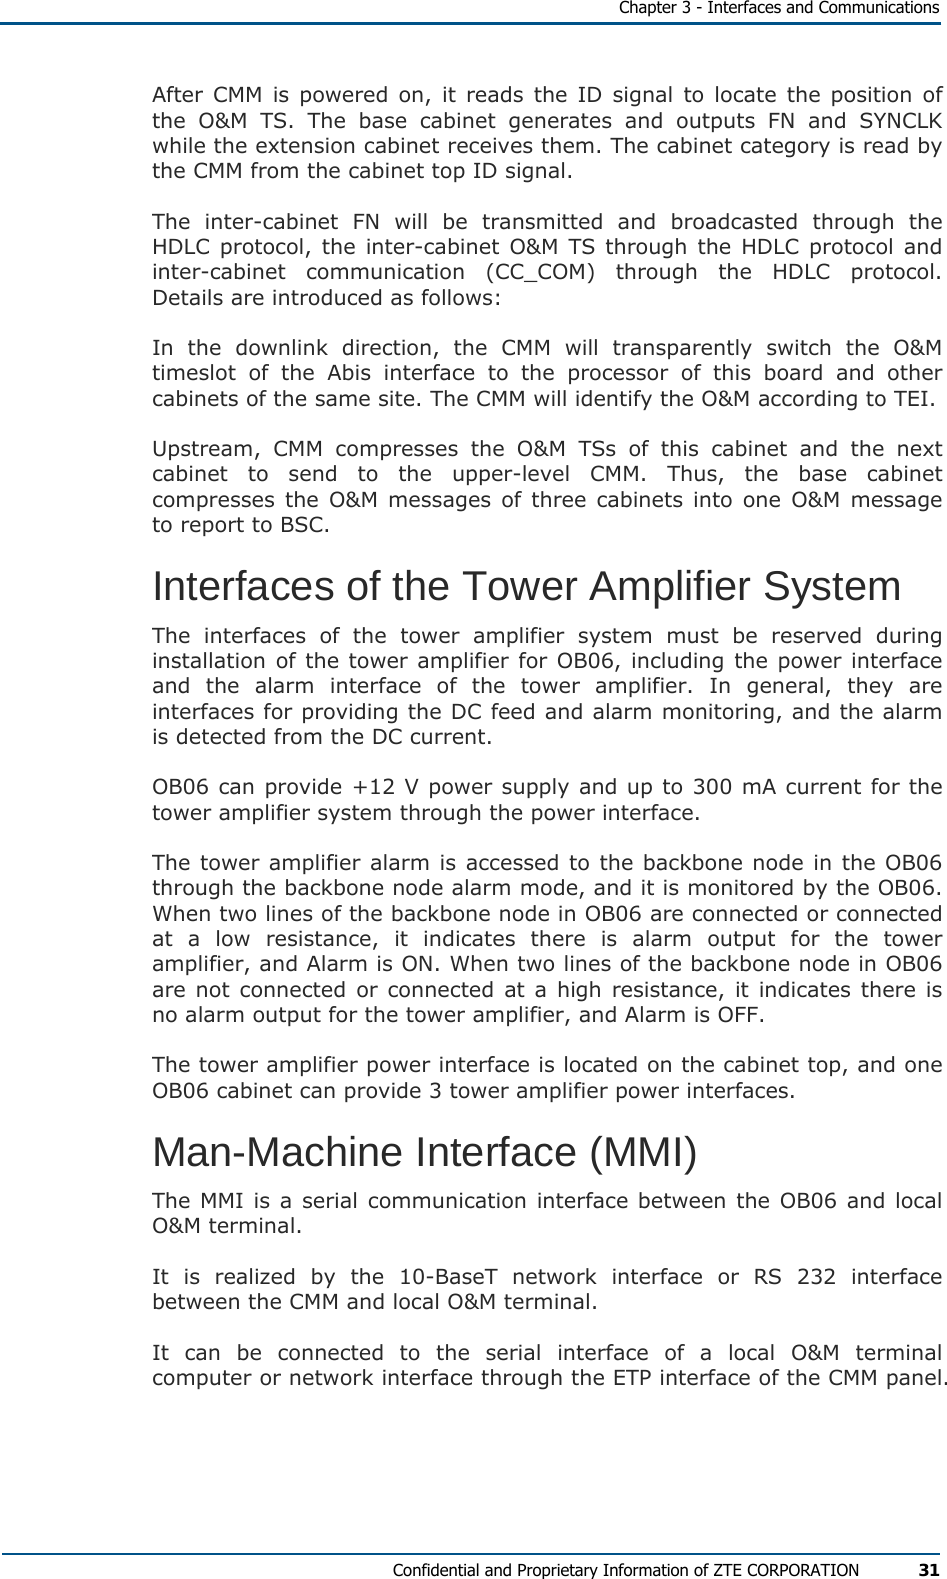   Chapter 3 - Interfaces and Communications Confidential and Proprietary Information of ZTE CORPORATION 31 After CMM is powered on, it reads the ID signal to locate the position of the O&amp;M TS. The base cabinet generates and outputs FN and SYNCLK while the extension cabinet receives them. The cabinet category is read by the CMM from the cabinet top ID signal. The inter-cabinet FN will be transmitted and broadcasted through the HDLC protocol, the inter-cabinet O&amp;M TS through the HDLC protocol and inter-cabinet communication (CC_COM) through the HDLC protocol. Details are introduced as follows: In the downlink direction, the CMM will transparently switch the O&amp;M timeslot of the Abis interface to the processor of this board and other cabinets of the same site. The CMM will identify the O&amp;M according to TEI. Upstream, CMM compresses the O&amp;M TSs of this cabinet and the next cabinet to send to the upper-level CMM. Thus, the base cabinet compresses the O&amp;M messages of three cabinets into one O&amp;M message to report to BSC. Interfaces of the Tower Amplifier System The interfaces of the tower amplifier system must be reserved during installation of the tower amplifier for OB06, including the power interface and the alarm interface of the tower amplifier. In general, they are interfaces for providing the DC feed and alarm monitoring, and the alarm is detected from the DC current. OB06 can provide +12 V power supply and up to 300 mA current for the tower amplifier system through the power interface. The tower amplifier alarm is accessed to the backbone node in the OB06 through the backbone node alarm mode, and it is monitored by the OB06. When two lines of the backbone node in OB06 are connected or connected at a low resistance, it indicates there is alarm output for the tower amplifier, and Alarm is ON. When two lines of the backbone node in OB06 are not connected or connected at a high resistance, it indicates there is no alarm output for the tower amplifier, and Alarm is OFF. The tower amplifier power interface is located on the cabinet top, and one OB06 cabinet can provide 3 tower amplifier power interfaces. Man-Machine Interface (MMI) The MMI is a serial communication interface between the OB06 and local O&amp;M terminal. It is realized by the 10-BaseT network interface or RS 232 interface between the CMM and local O&amp;M terminal. It can be connected to the serial interface of a local O&amp;M terminal computer or network interface through the ETP interface of the CMM panel. 